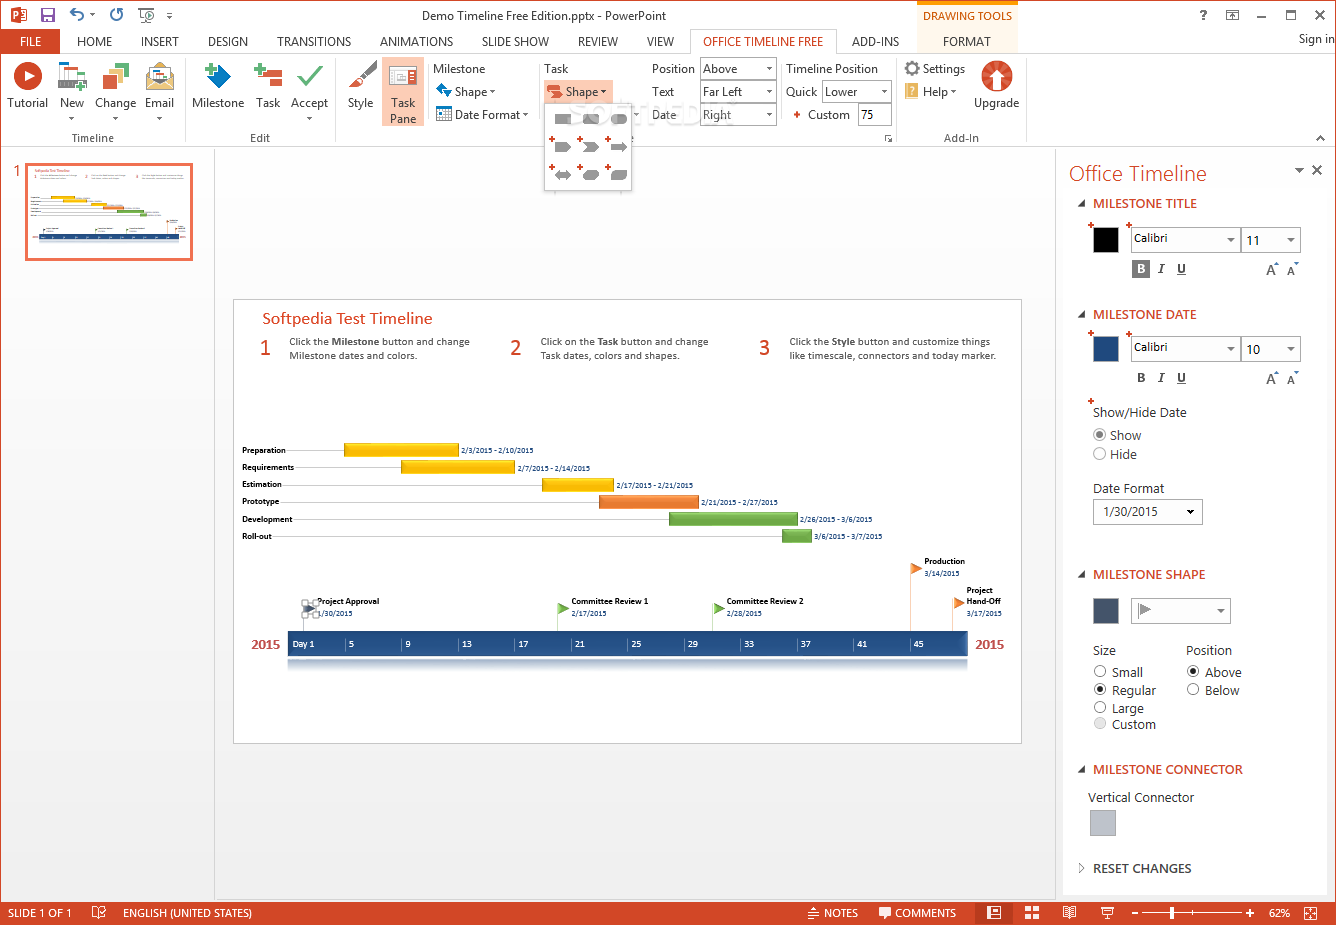 office timeline add-in for powerpoint